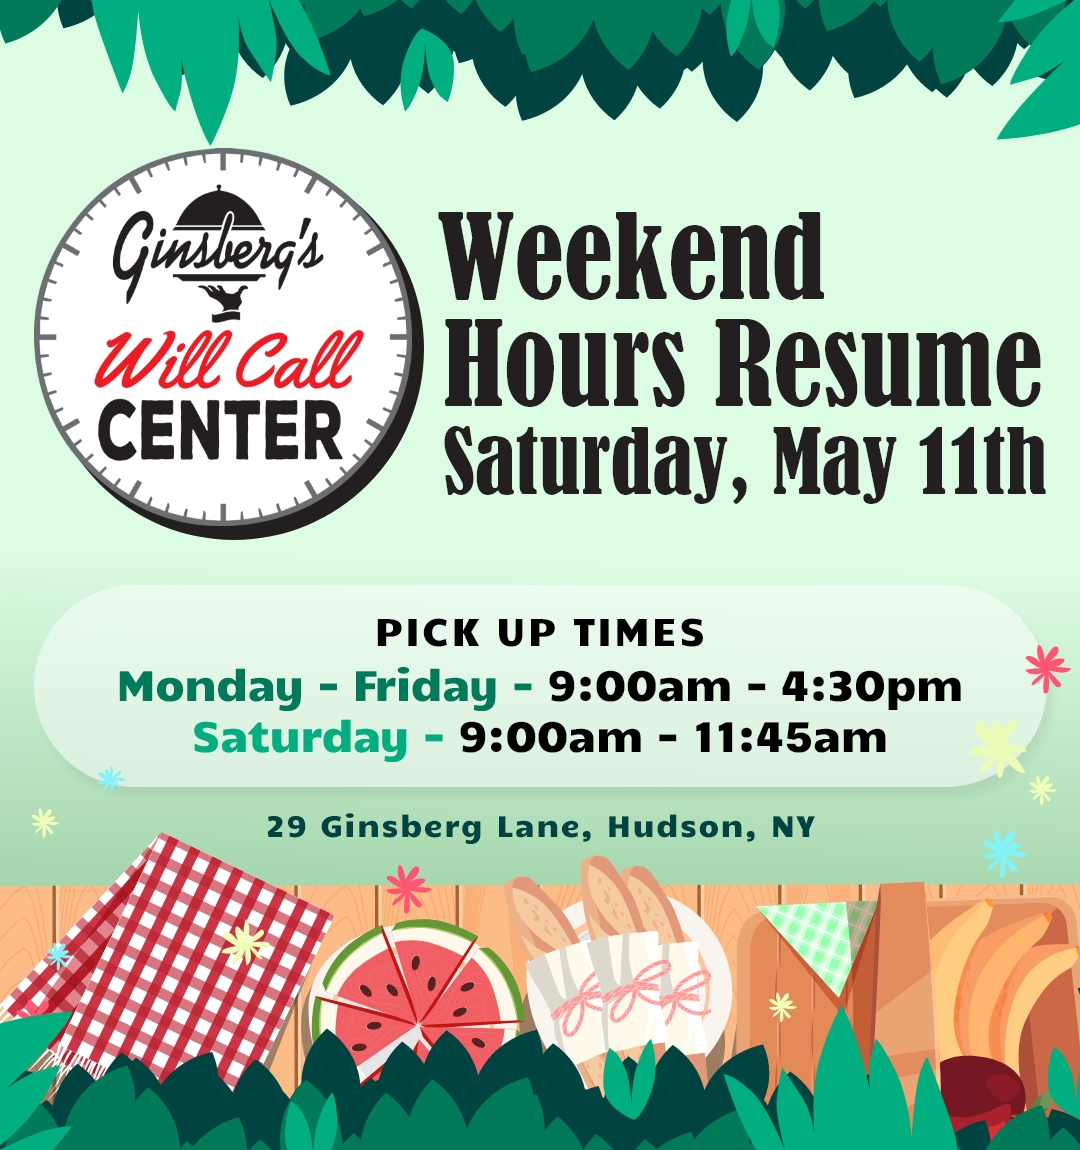 Our Will Call Center resumes weekend hours on May 11th at our location in #HudsonNY ! 🌷⁠
⁠
Monday - Friday: Call in 8:00am – 3:30pm for pick-up between 9:00am – 4:30pm⁠ | Saturdays: Call in 8:00am – 11:00am for pick-up between 9:00am – 11:45am⁠
Closed Sundays ⁠